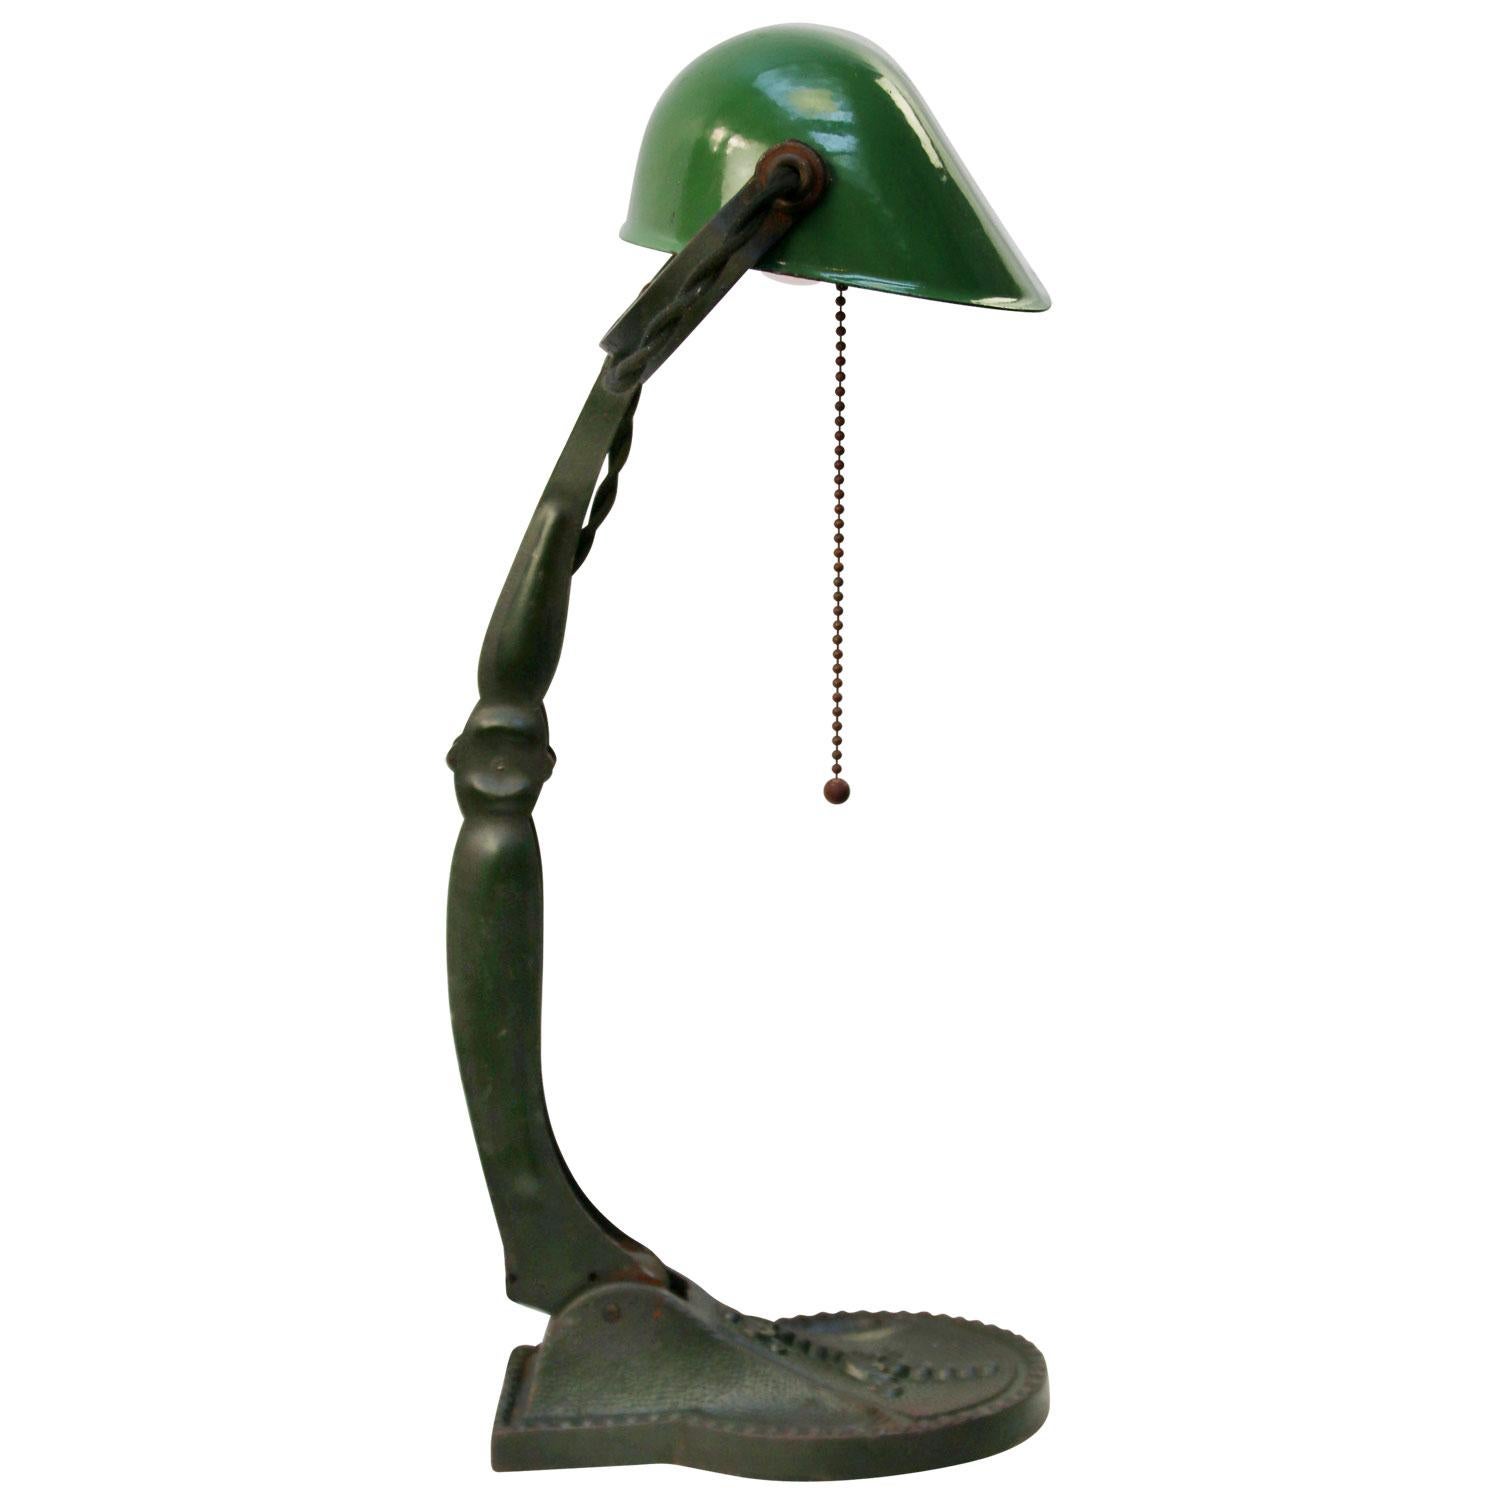 why are bankers lamps green